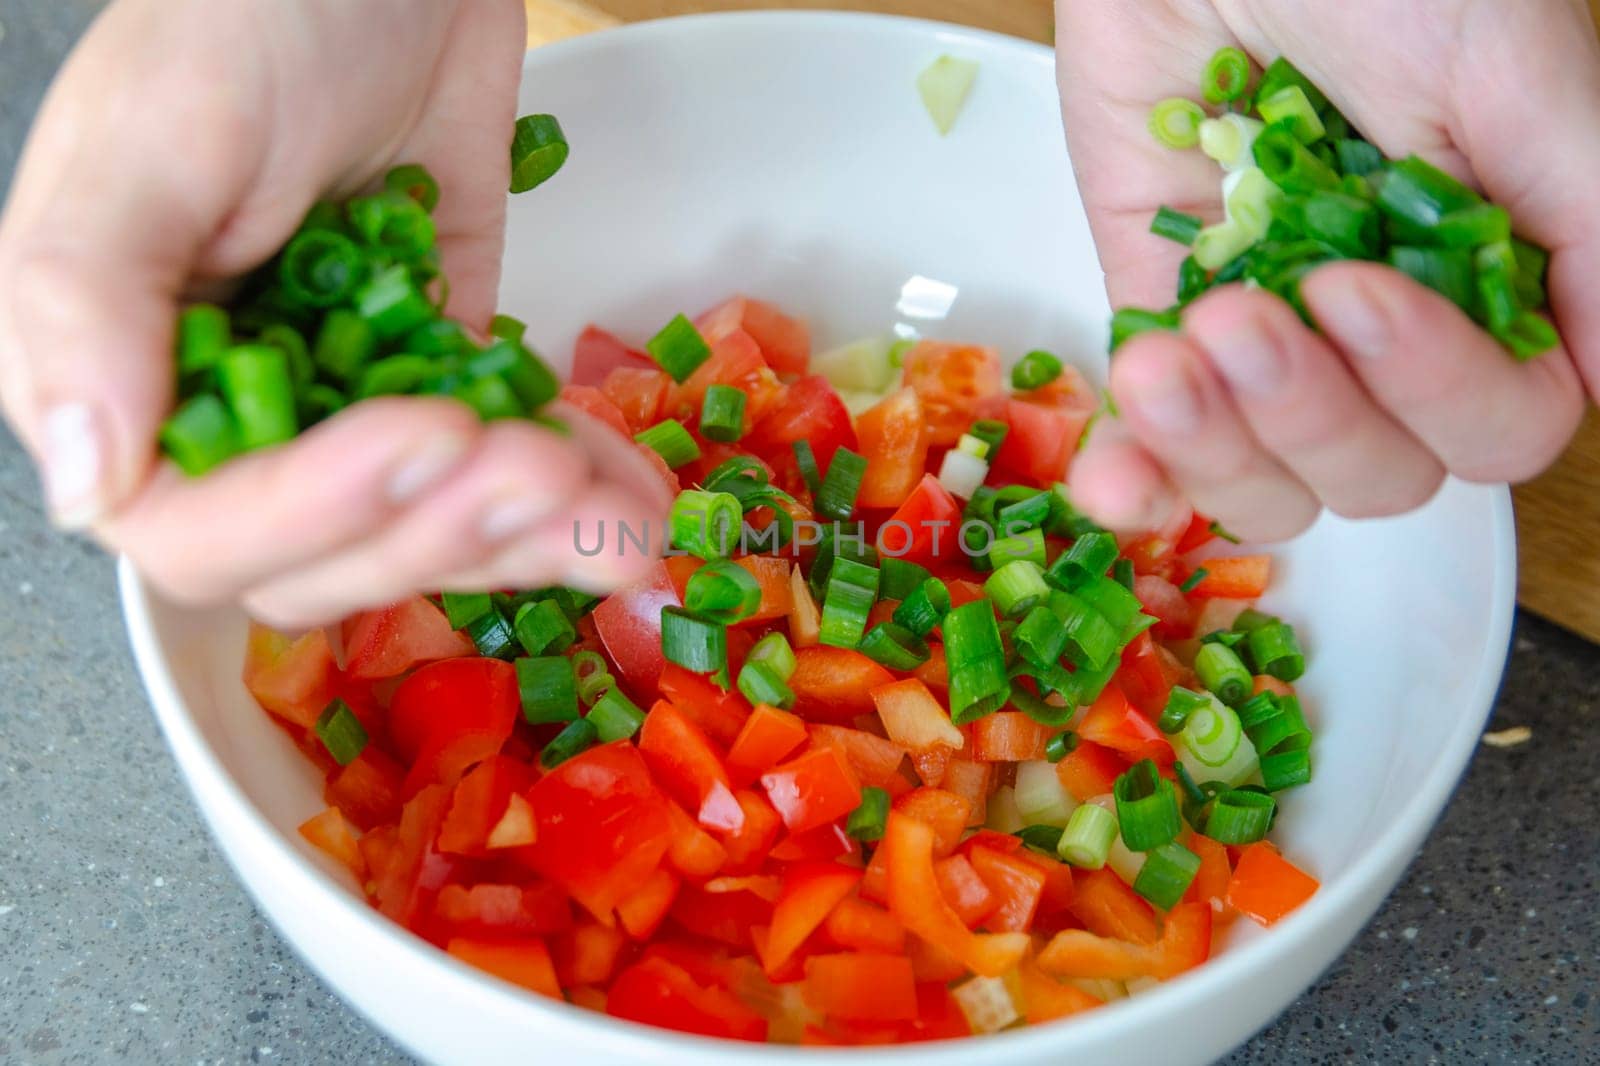 The process of preparing salad. Close-up of a woman's hands pouring finely chopped green onions into a salad. High quality photo. by SERSOL